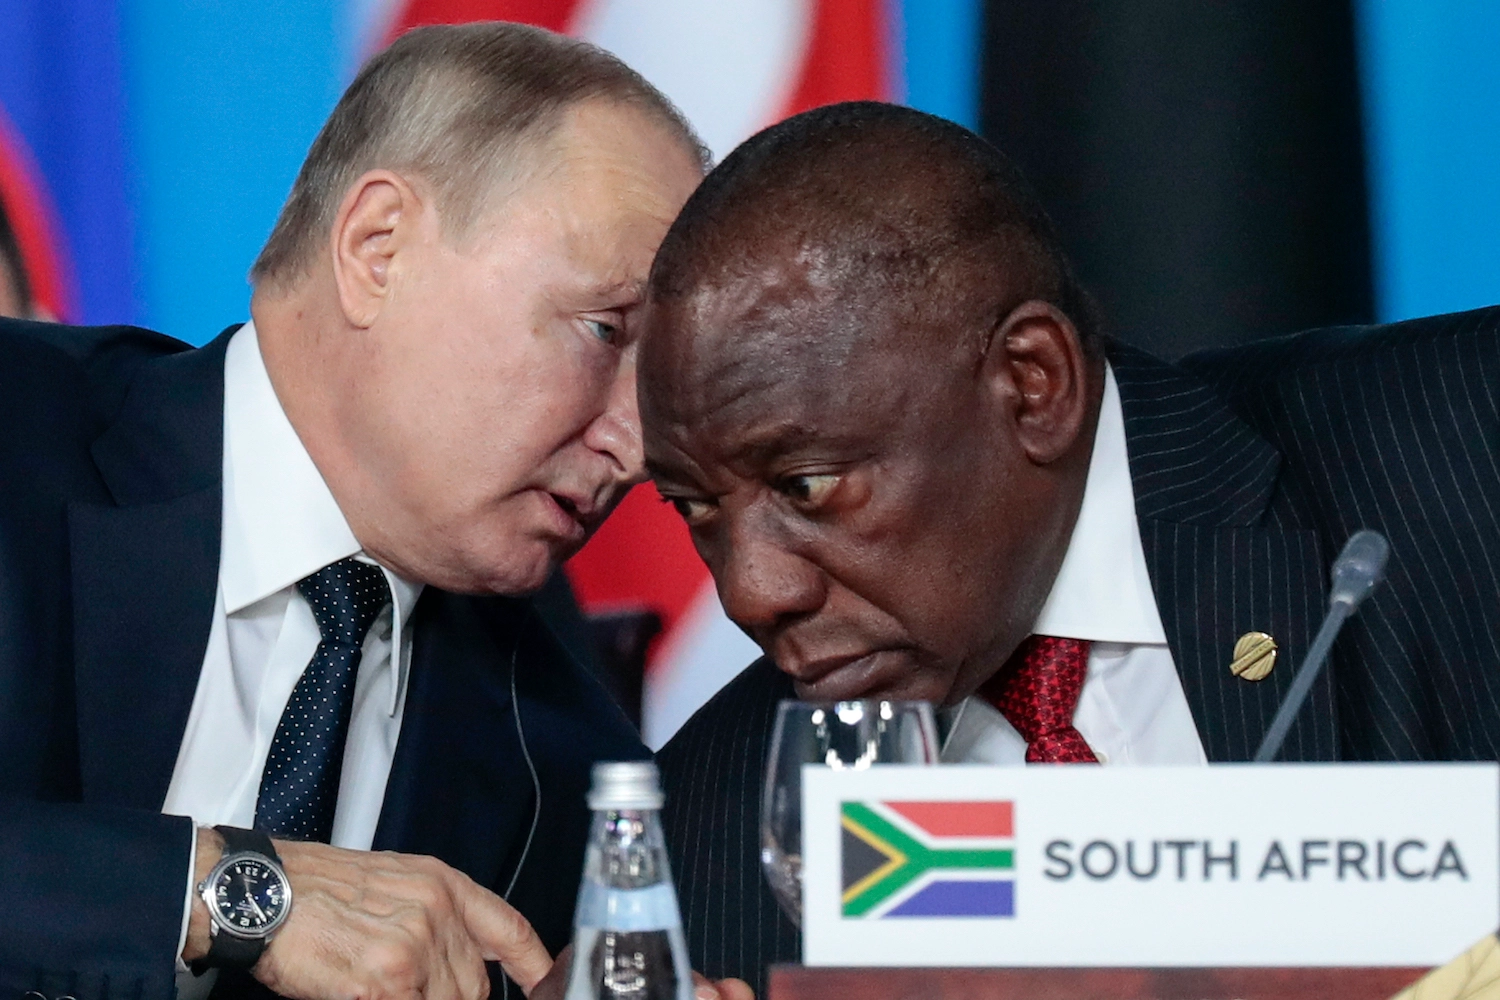 South Africa condemns suspension of Russia from UN rights council